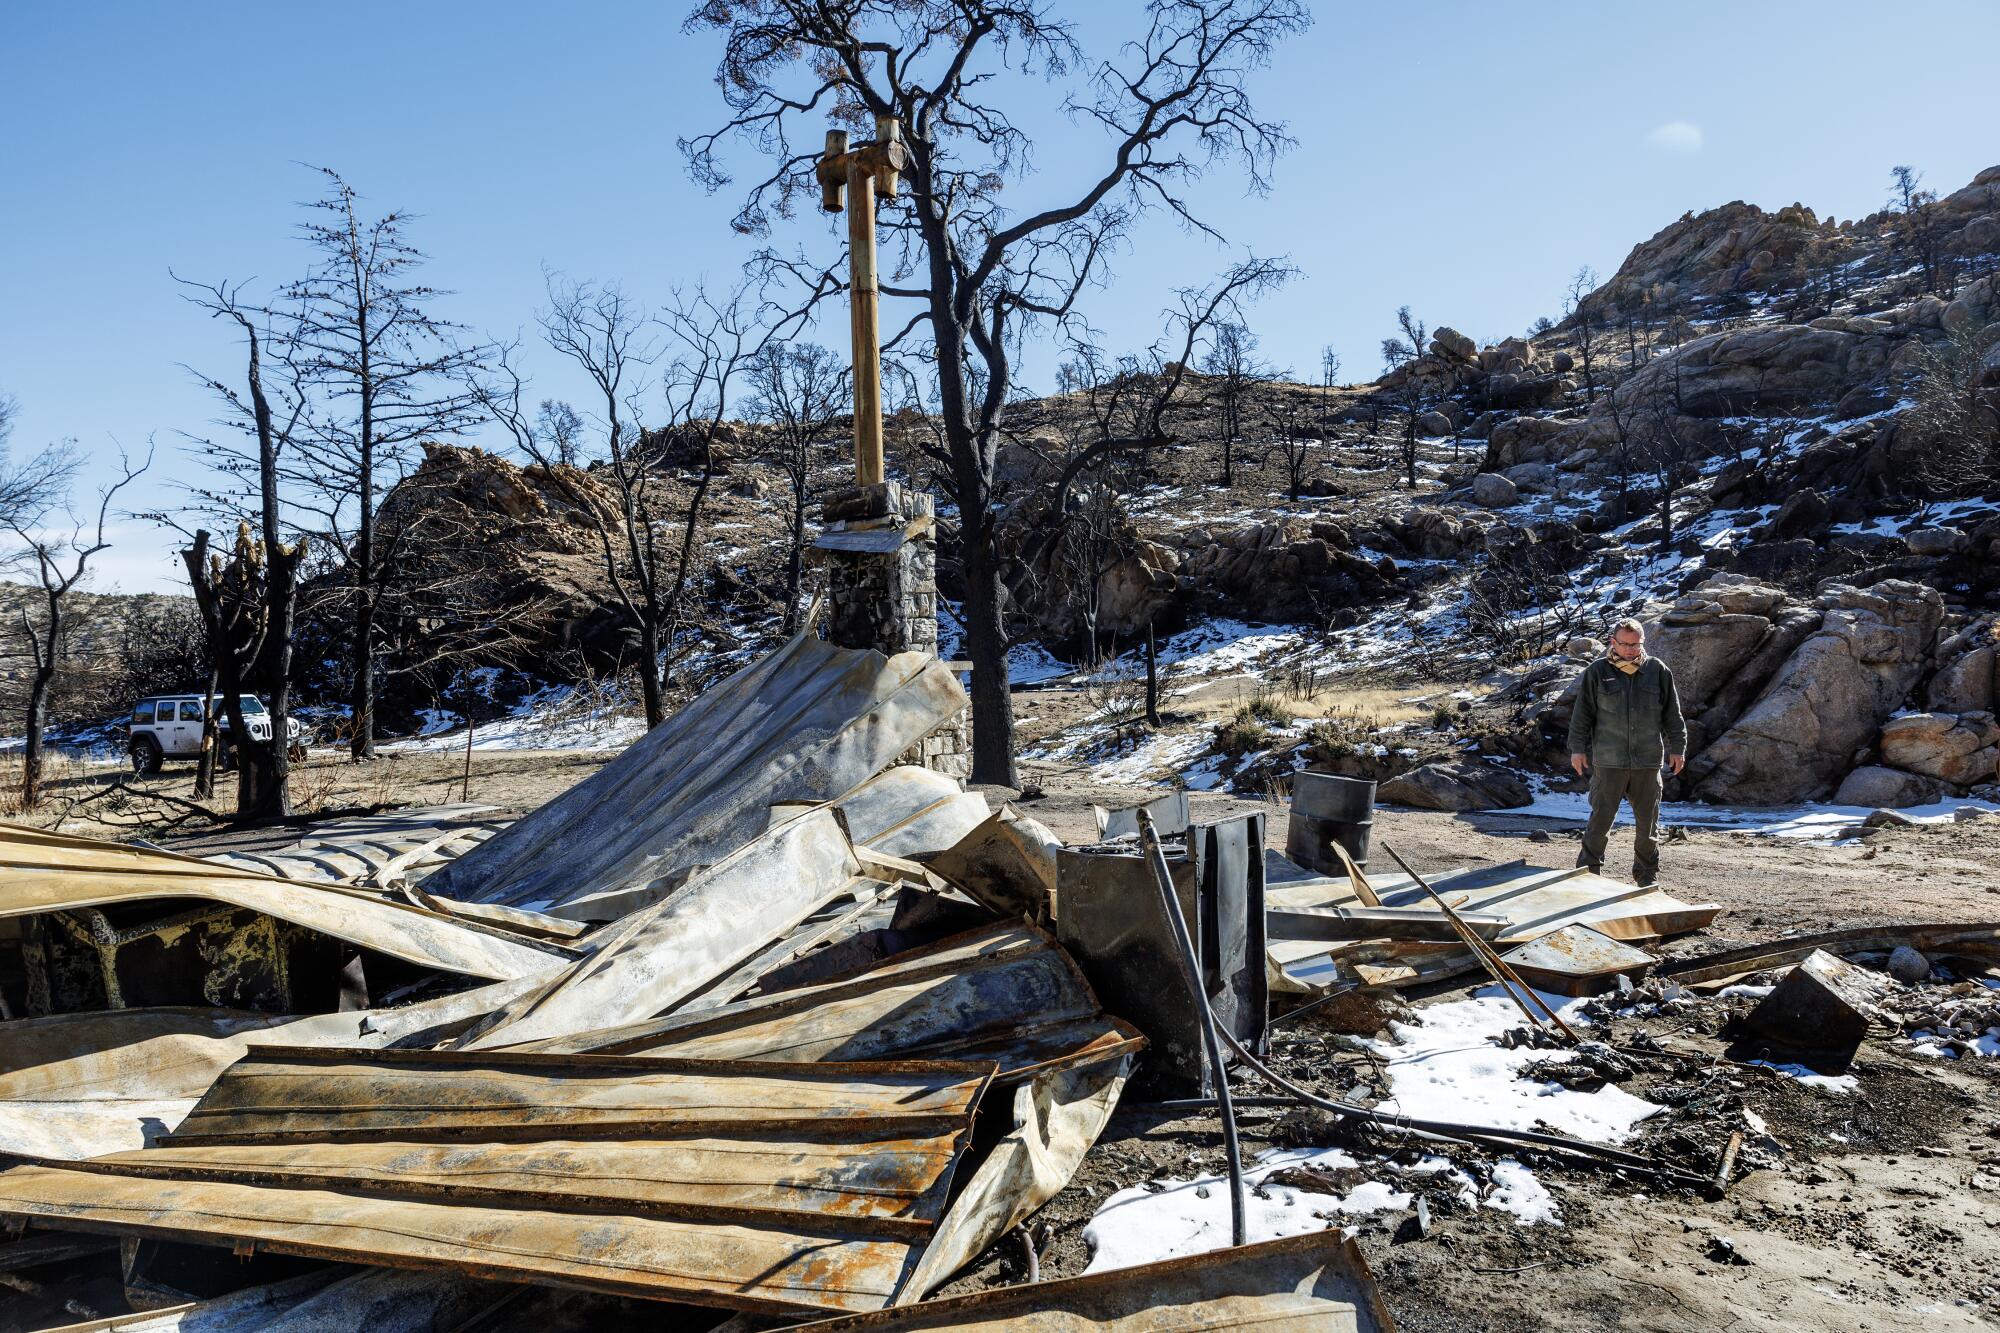 A man surveys the remains of a burned cabin.